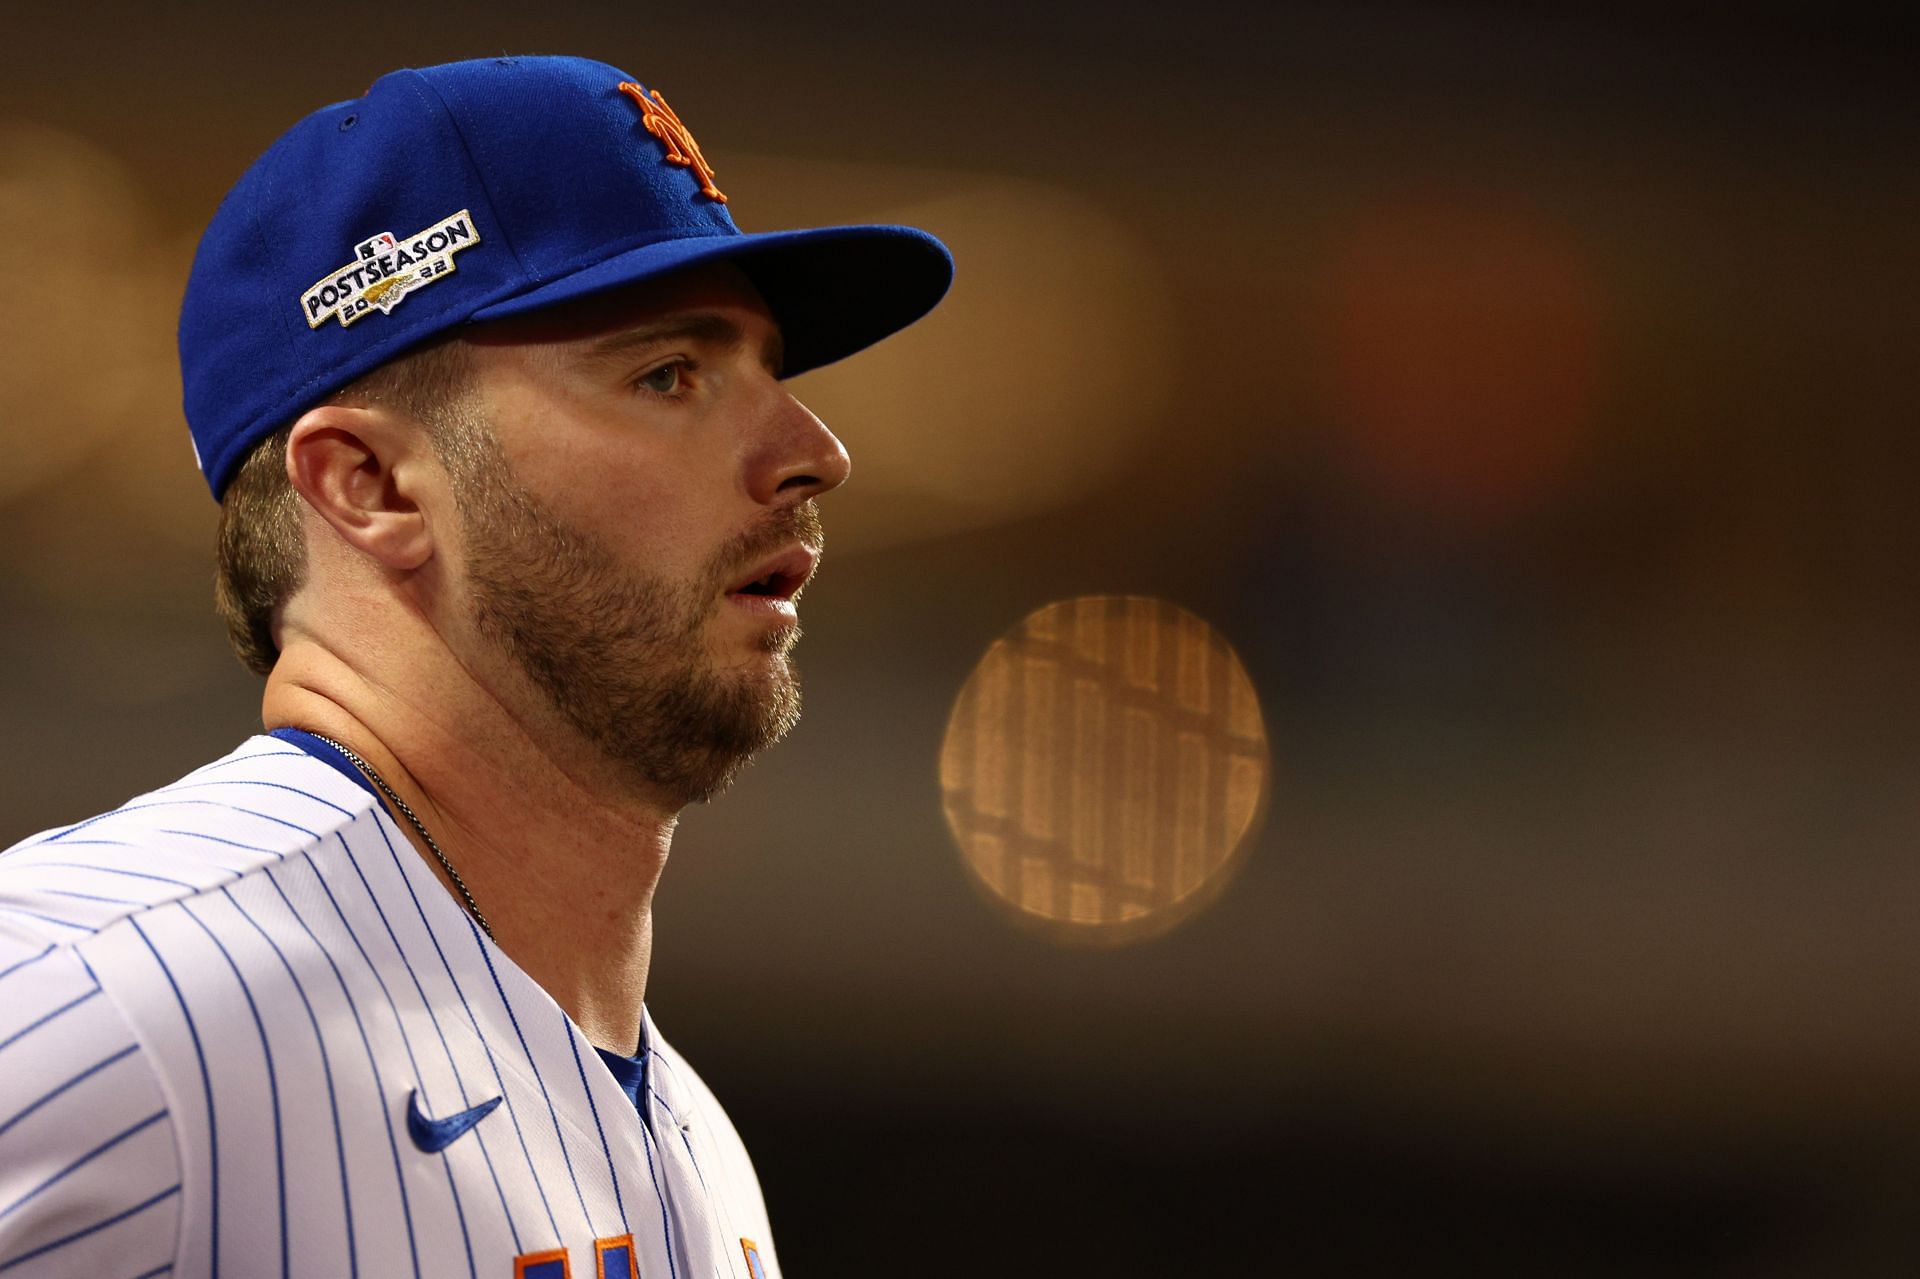 MLB fans react to the possible projected contract extension for Pete Alonso  at the end of the 2023 season - Sounds about right